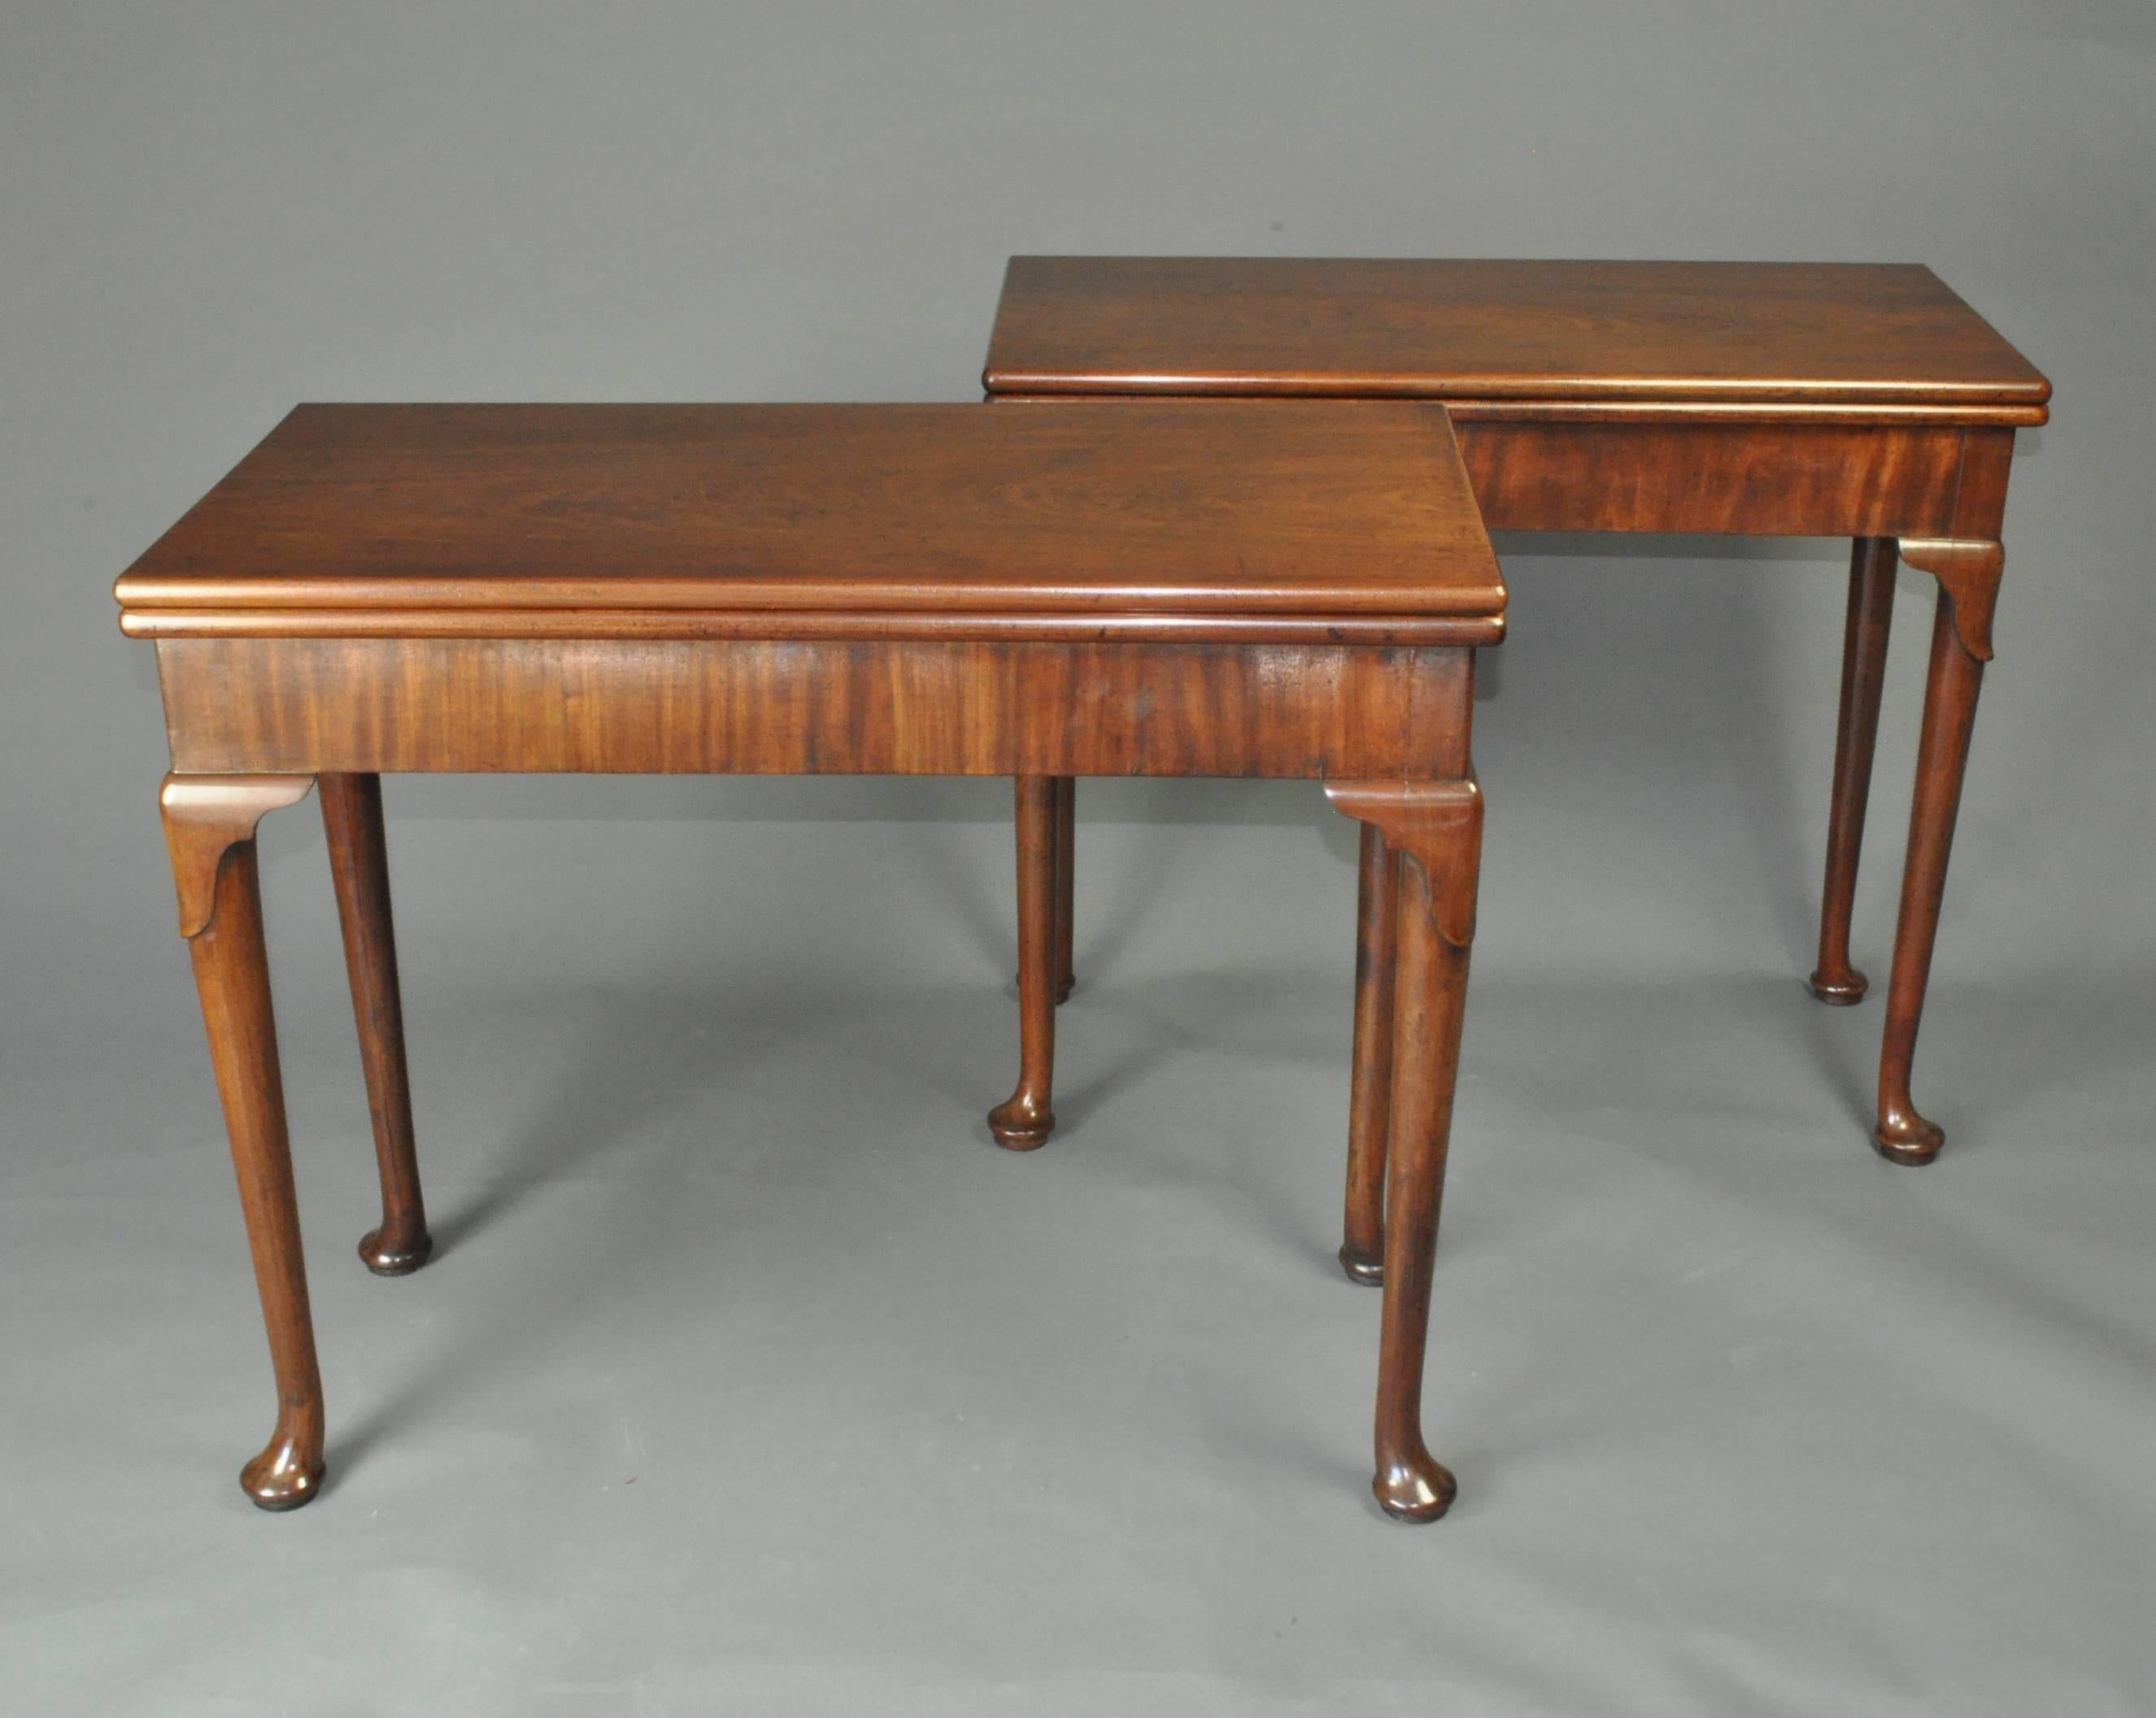 A matched pair of George II mid-18th century mahogany card tables with rectangular tops supported on concertina action bases with plain friezes and standing on lappet carved legs with pad feet. Both baize lined for cards, one 34” wide, the other 35”